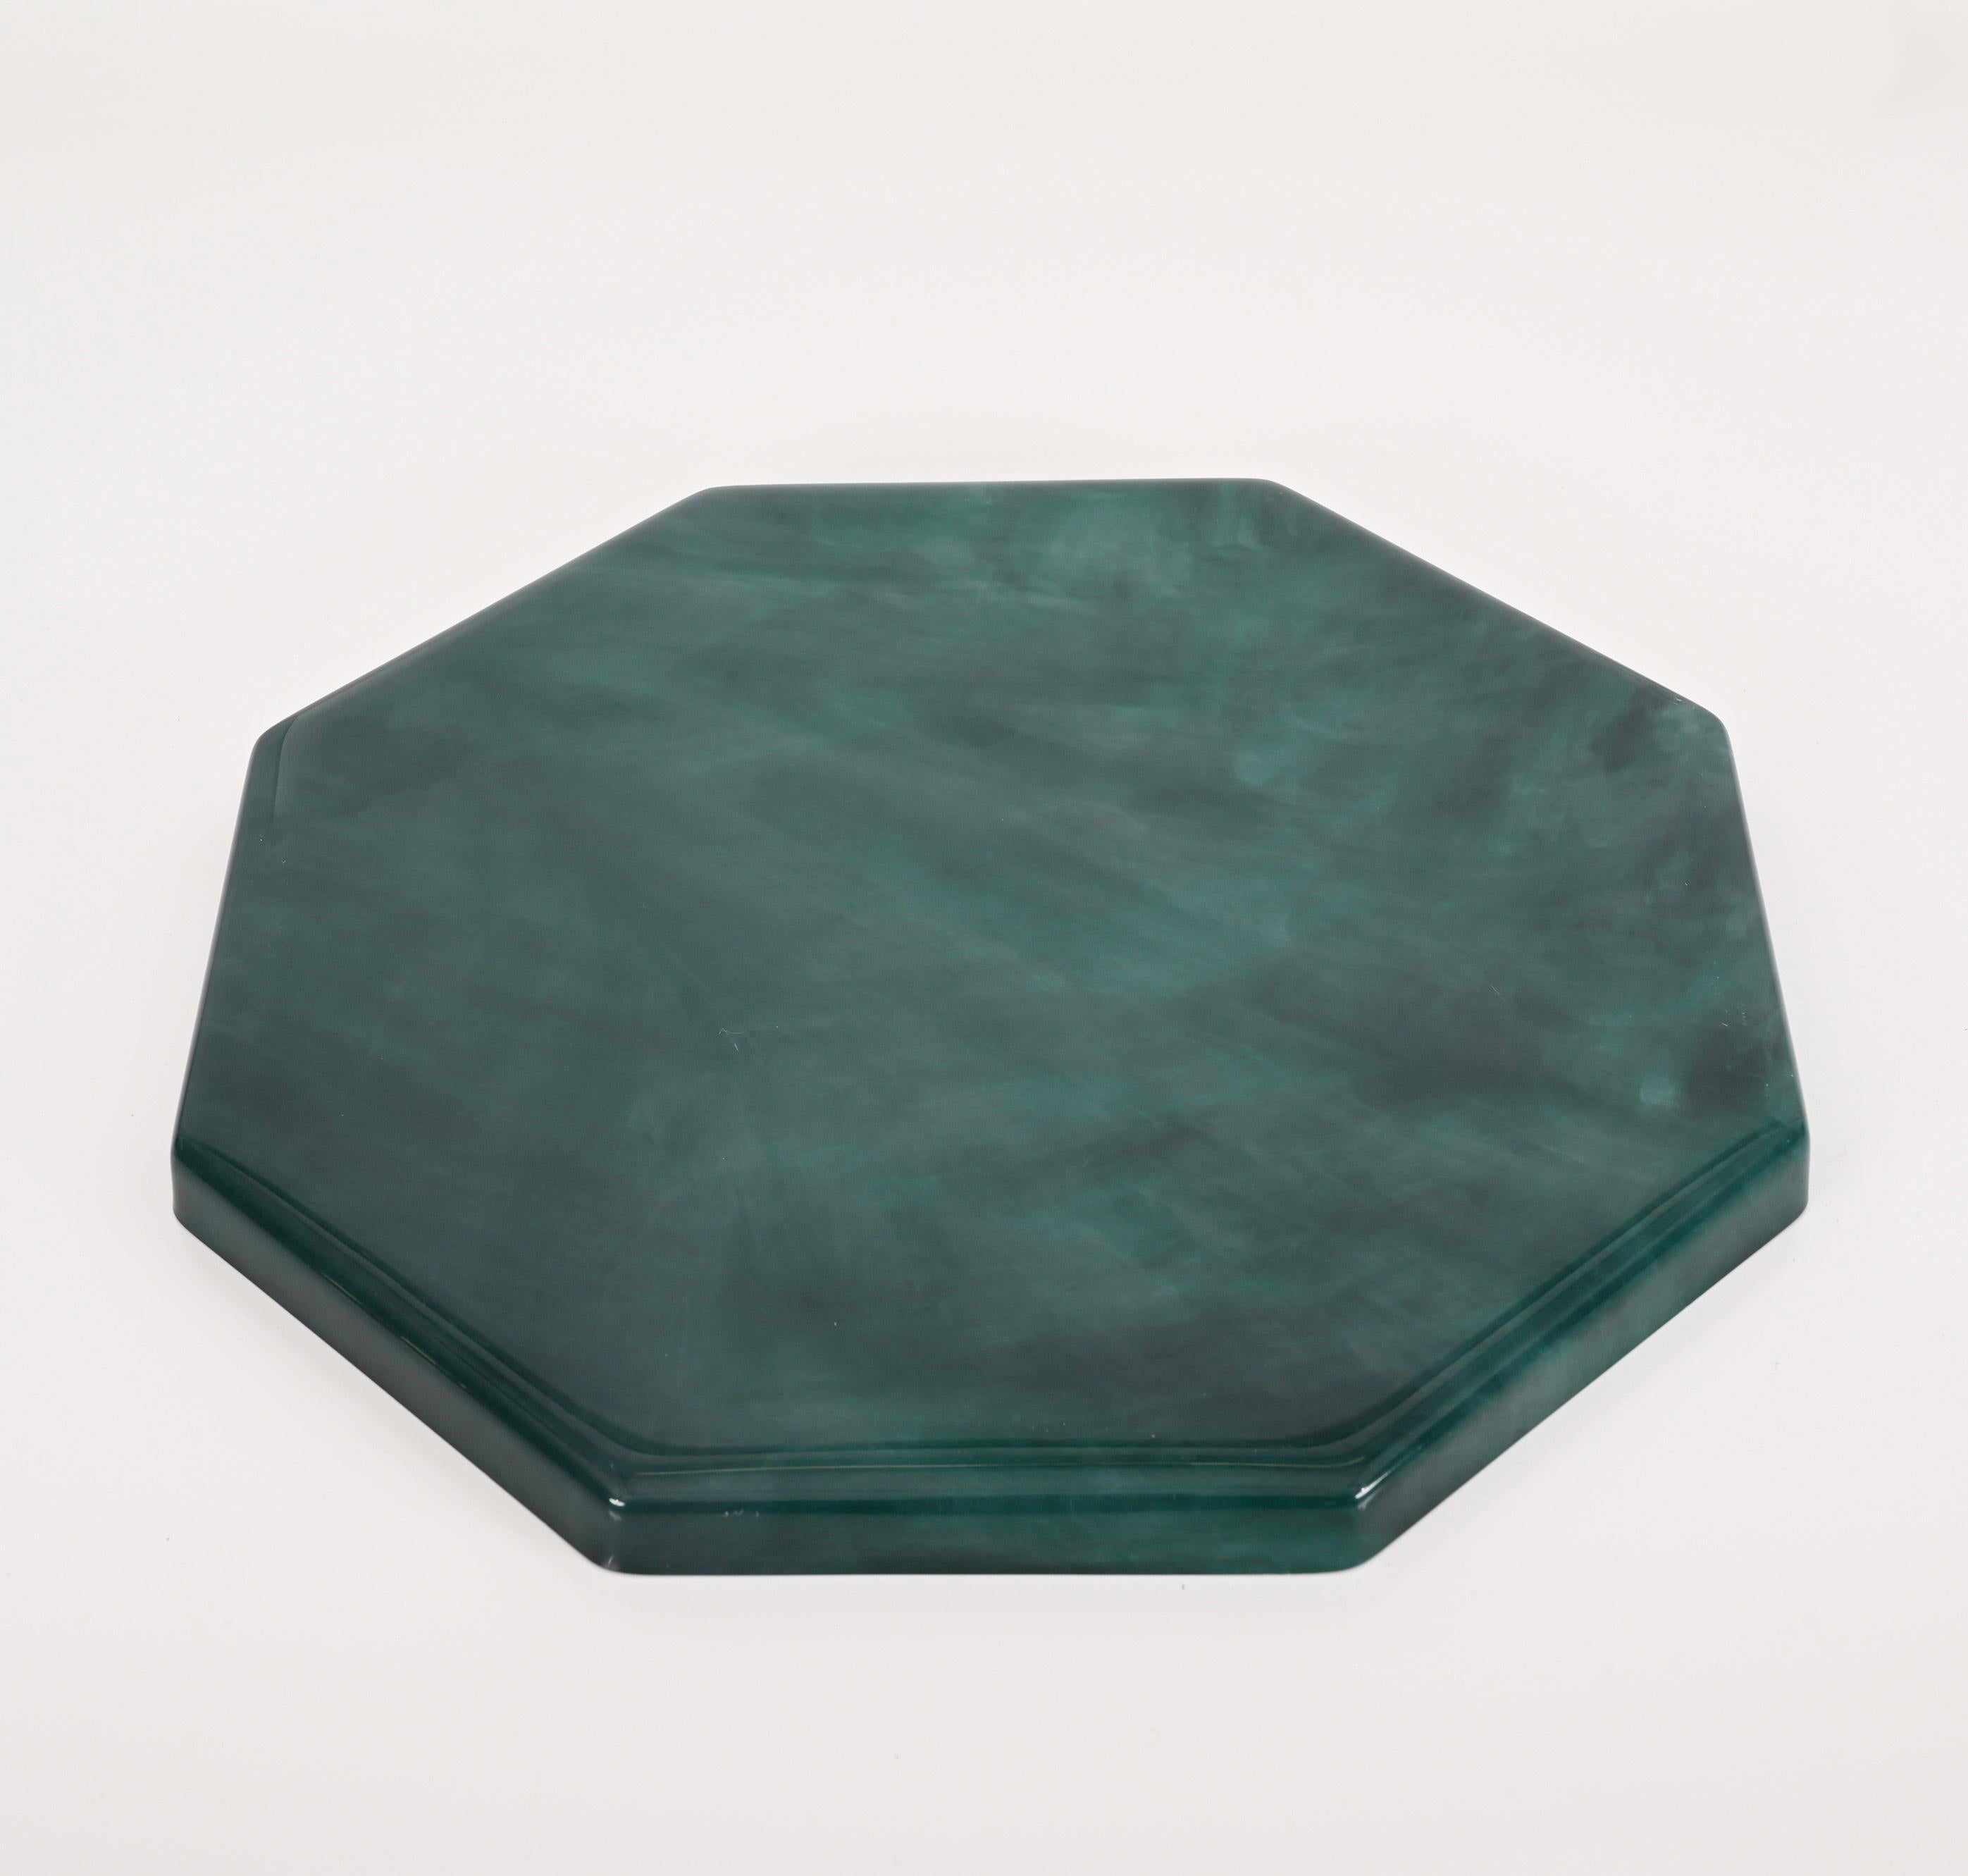 Midcentury Marble Effect Lucite and Steel Octagonal Serving Tray, Italy, 1980s For Sale 6